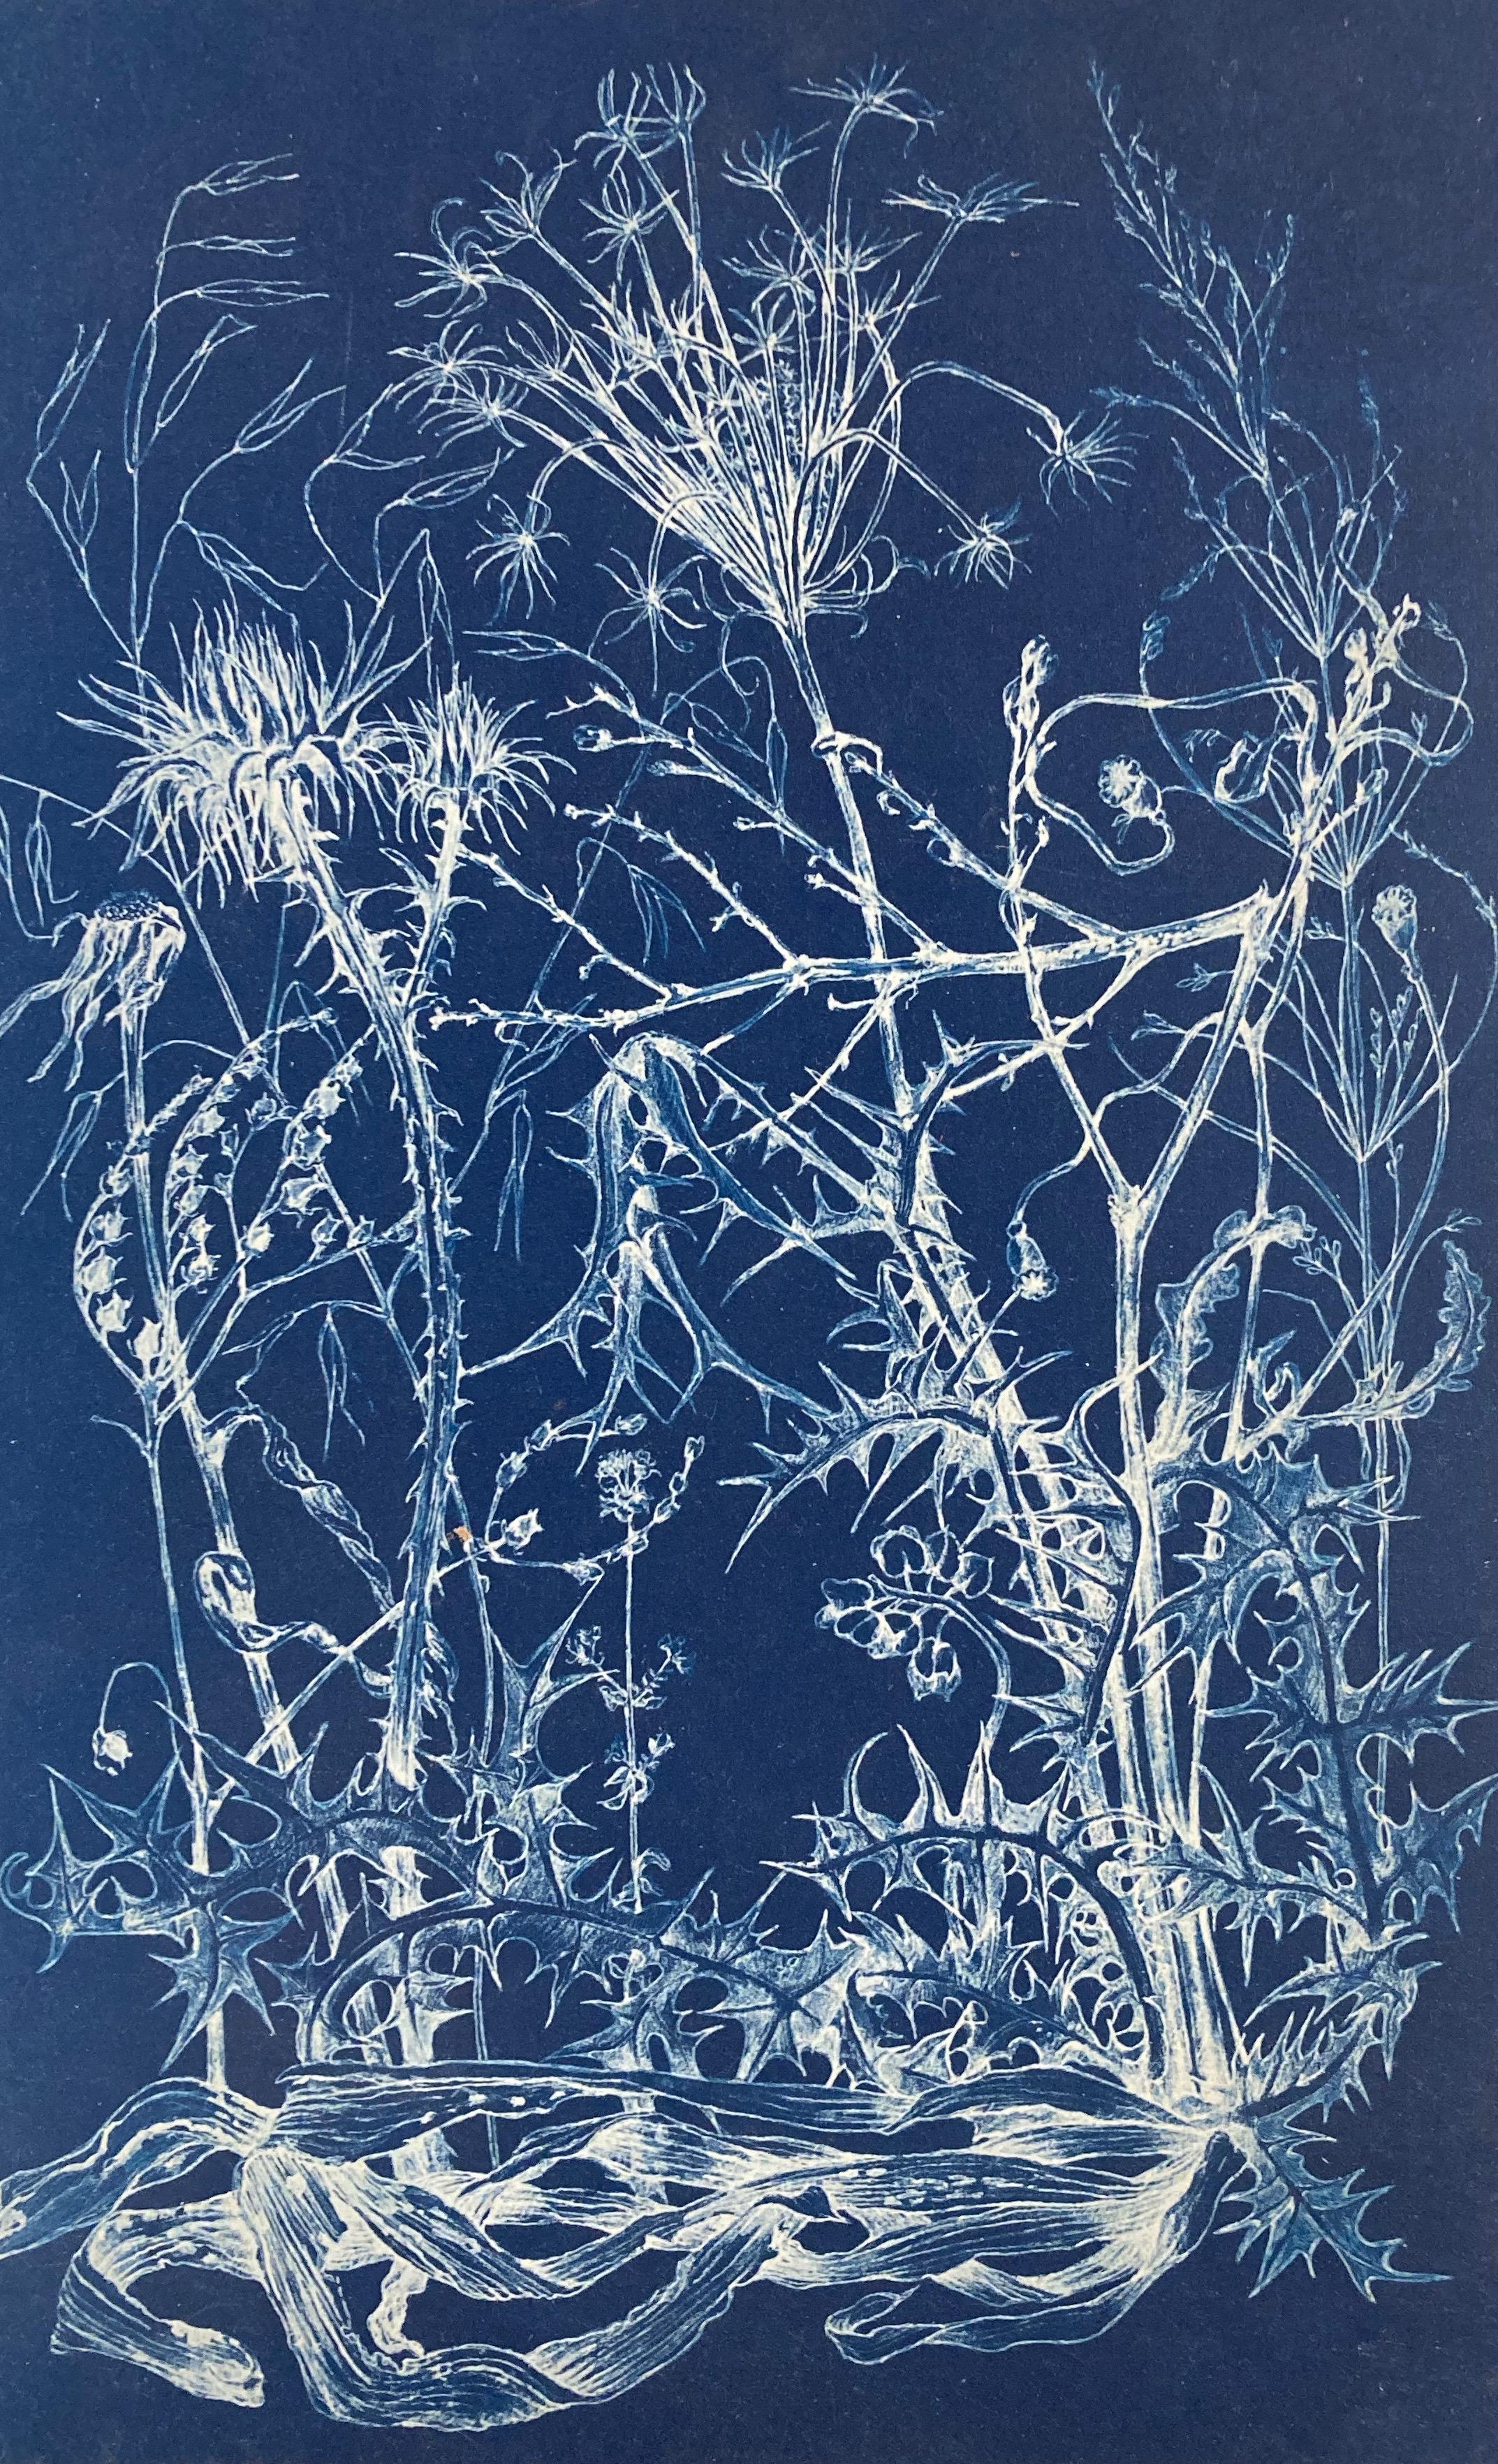 Judith Allen-Efstathiou Landscape Photograph - 'Mapping the Walk' Photograhic Flower Study Realistic and Abstract in Blue/White